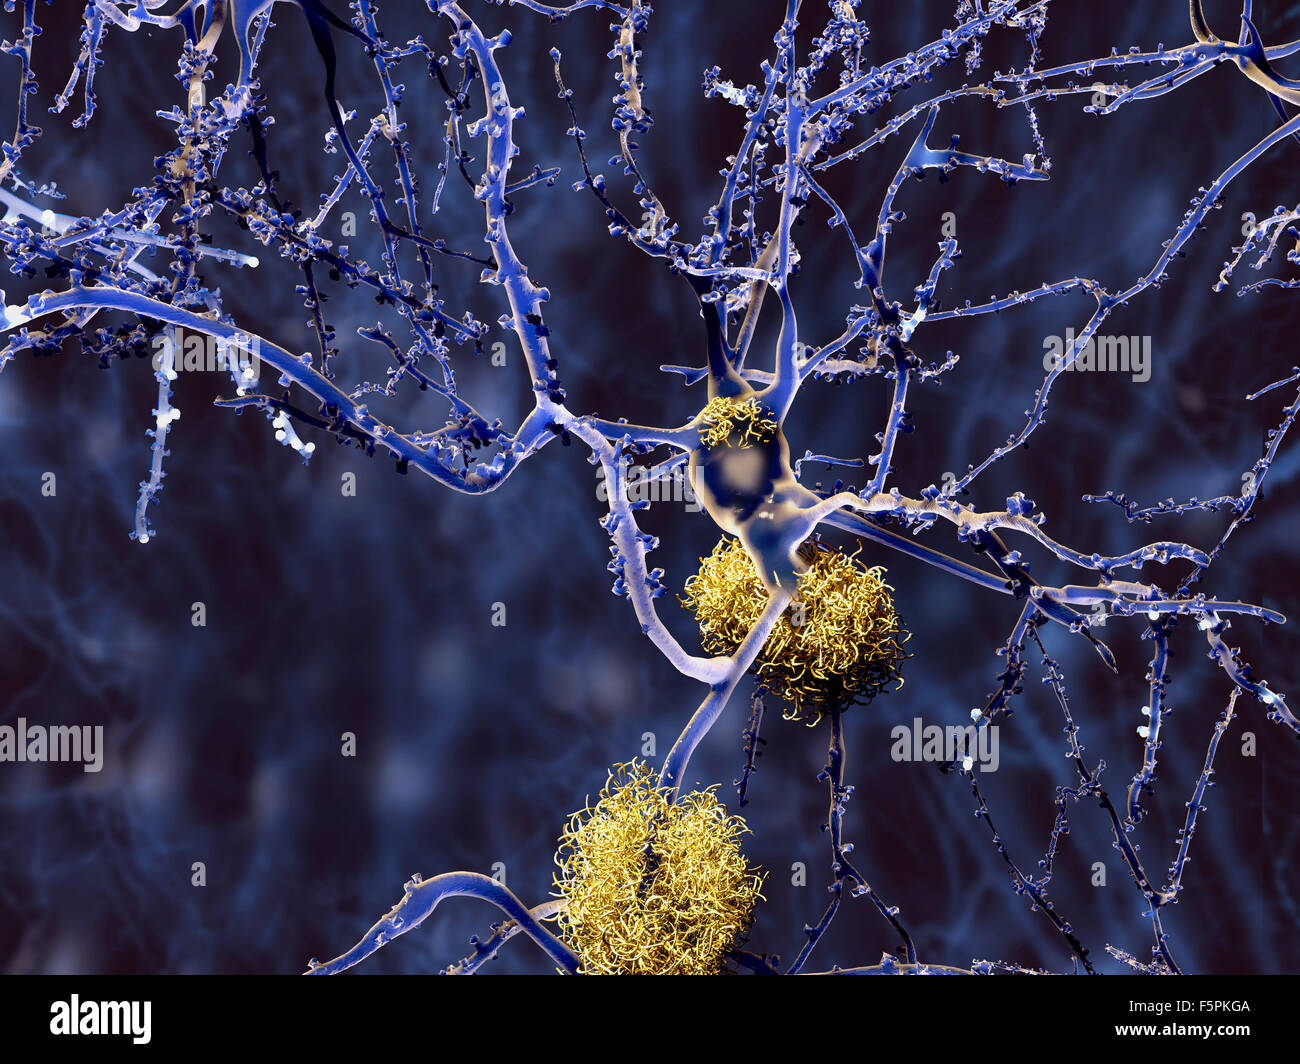 Alzheimer's disease. Computer illustration of amyloid plaques amongst neurons. Amyloid plaques are characteristic features of Stock Photo